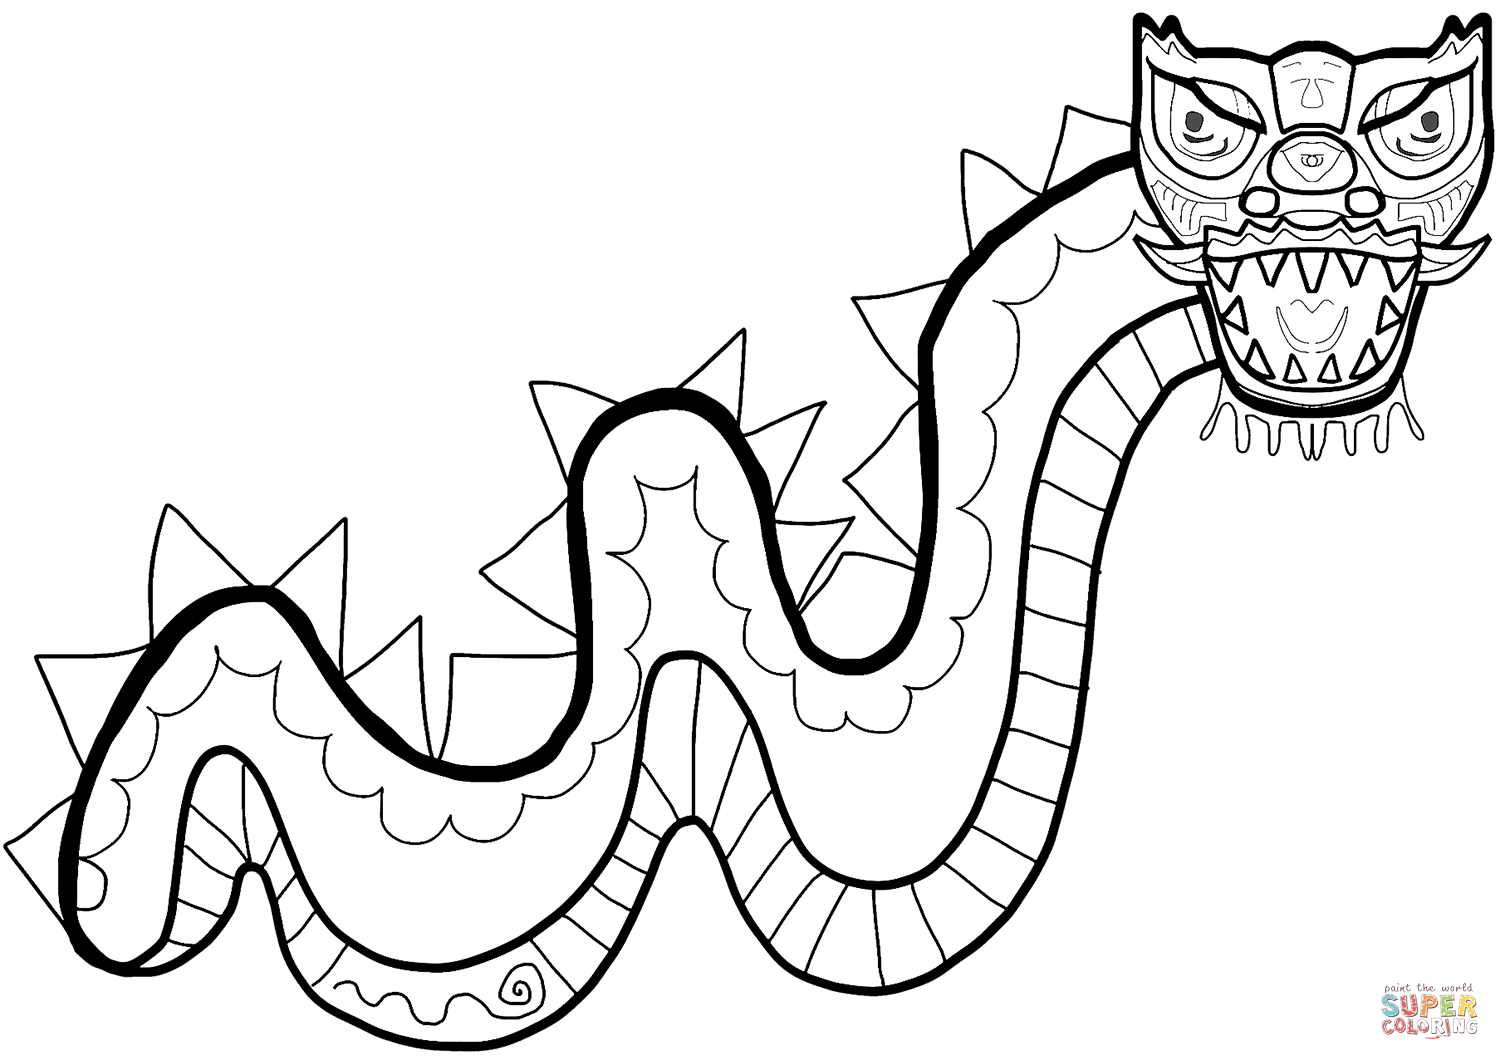 Chinese new year dragon coloring page free printable coloring pages